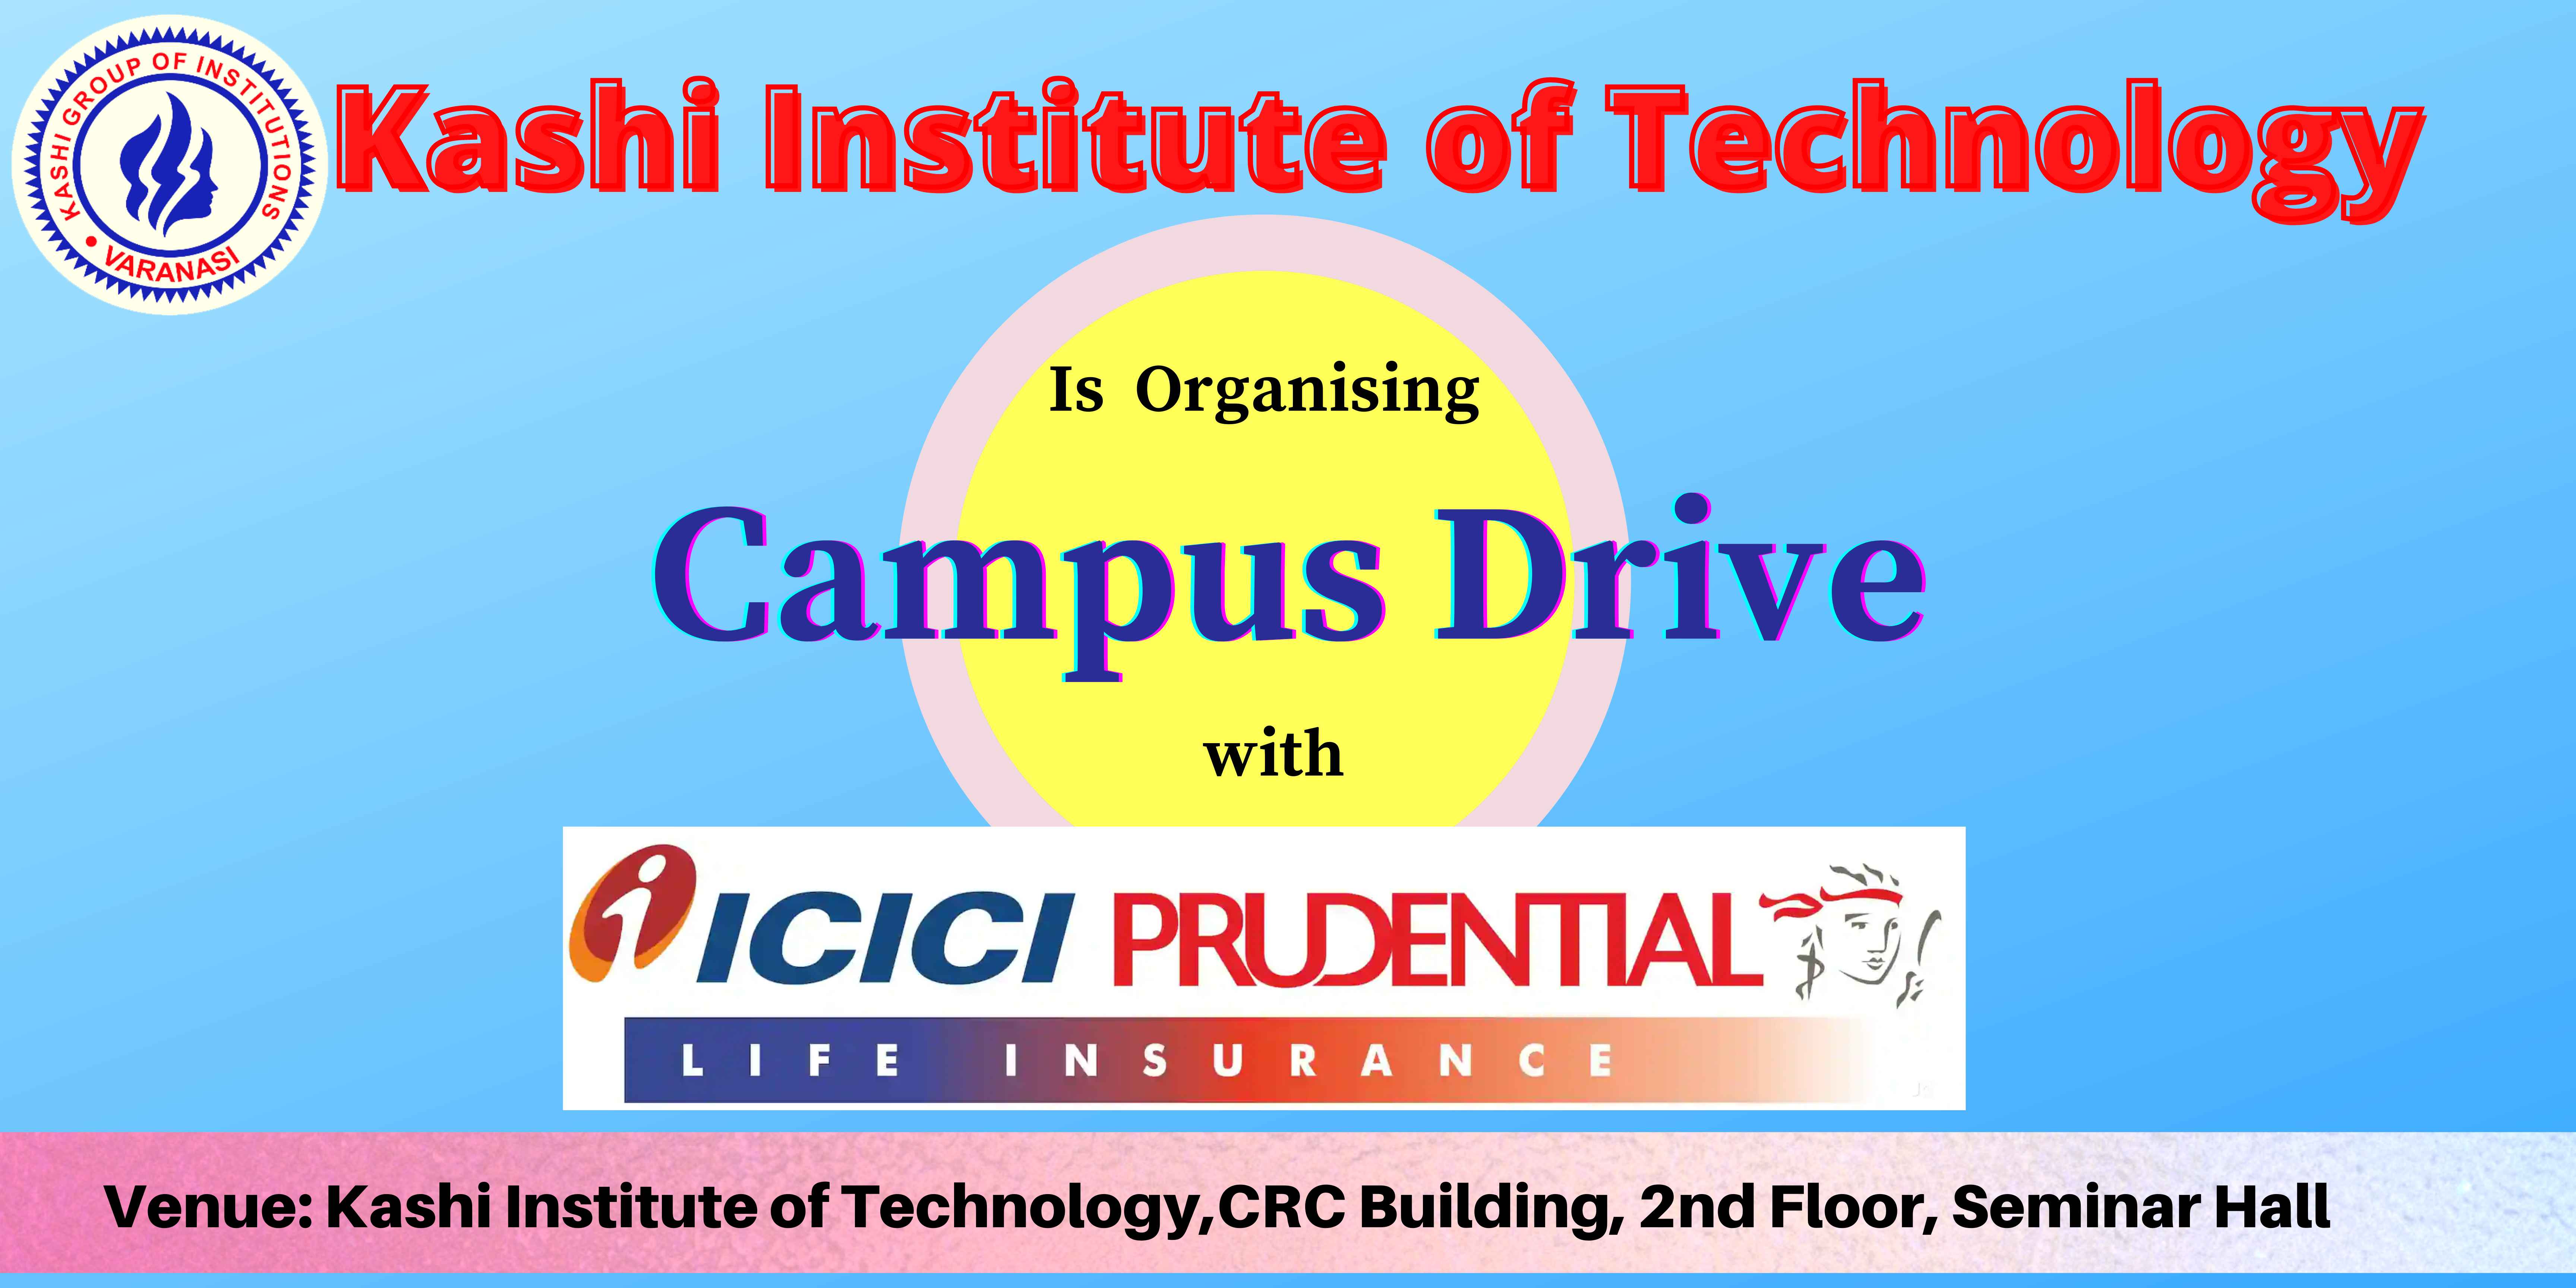 Venue Kashi Institute of Technology,CRC Building, 2nd Floor, Seminar Hall - Copy